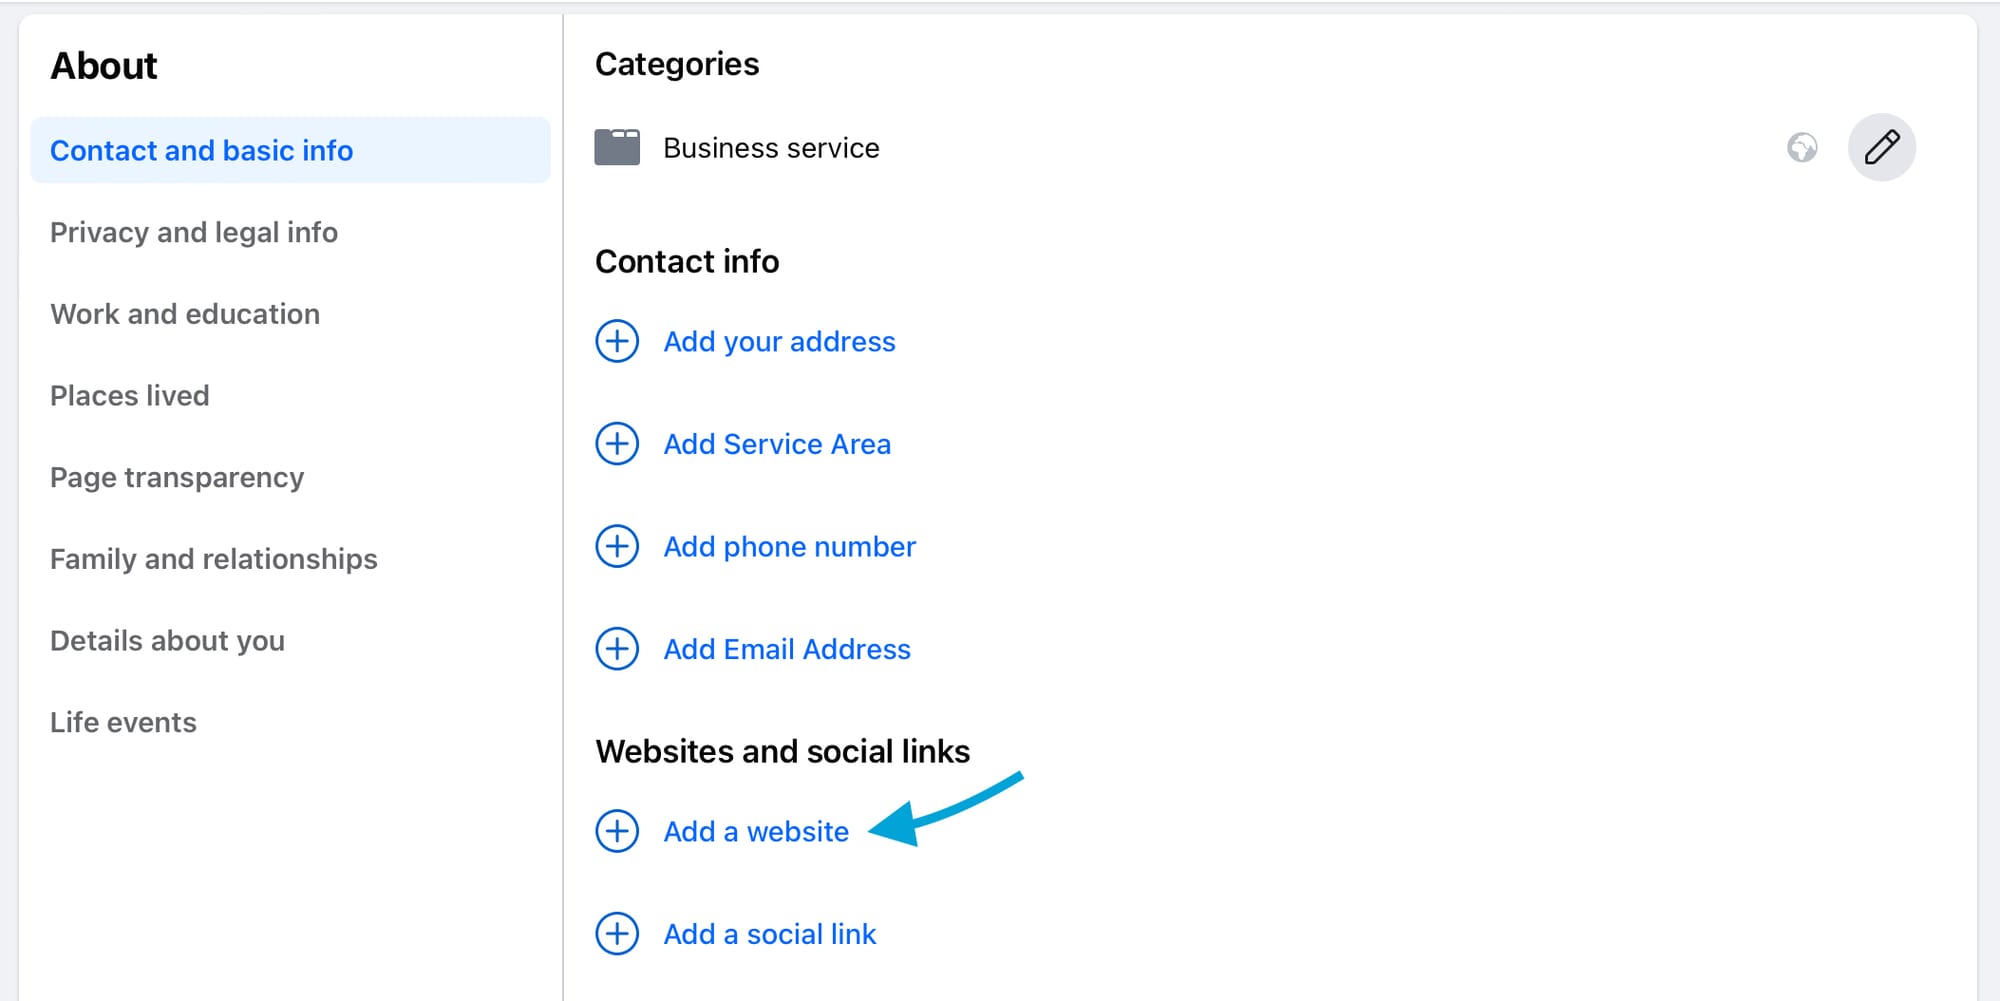 Add a website link to the About section of your Facebook Page